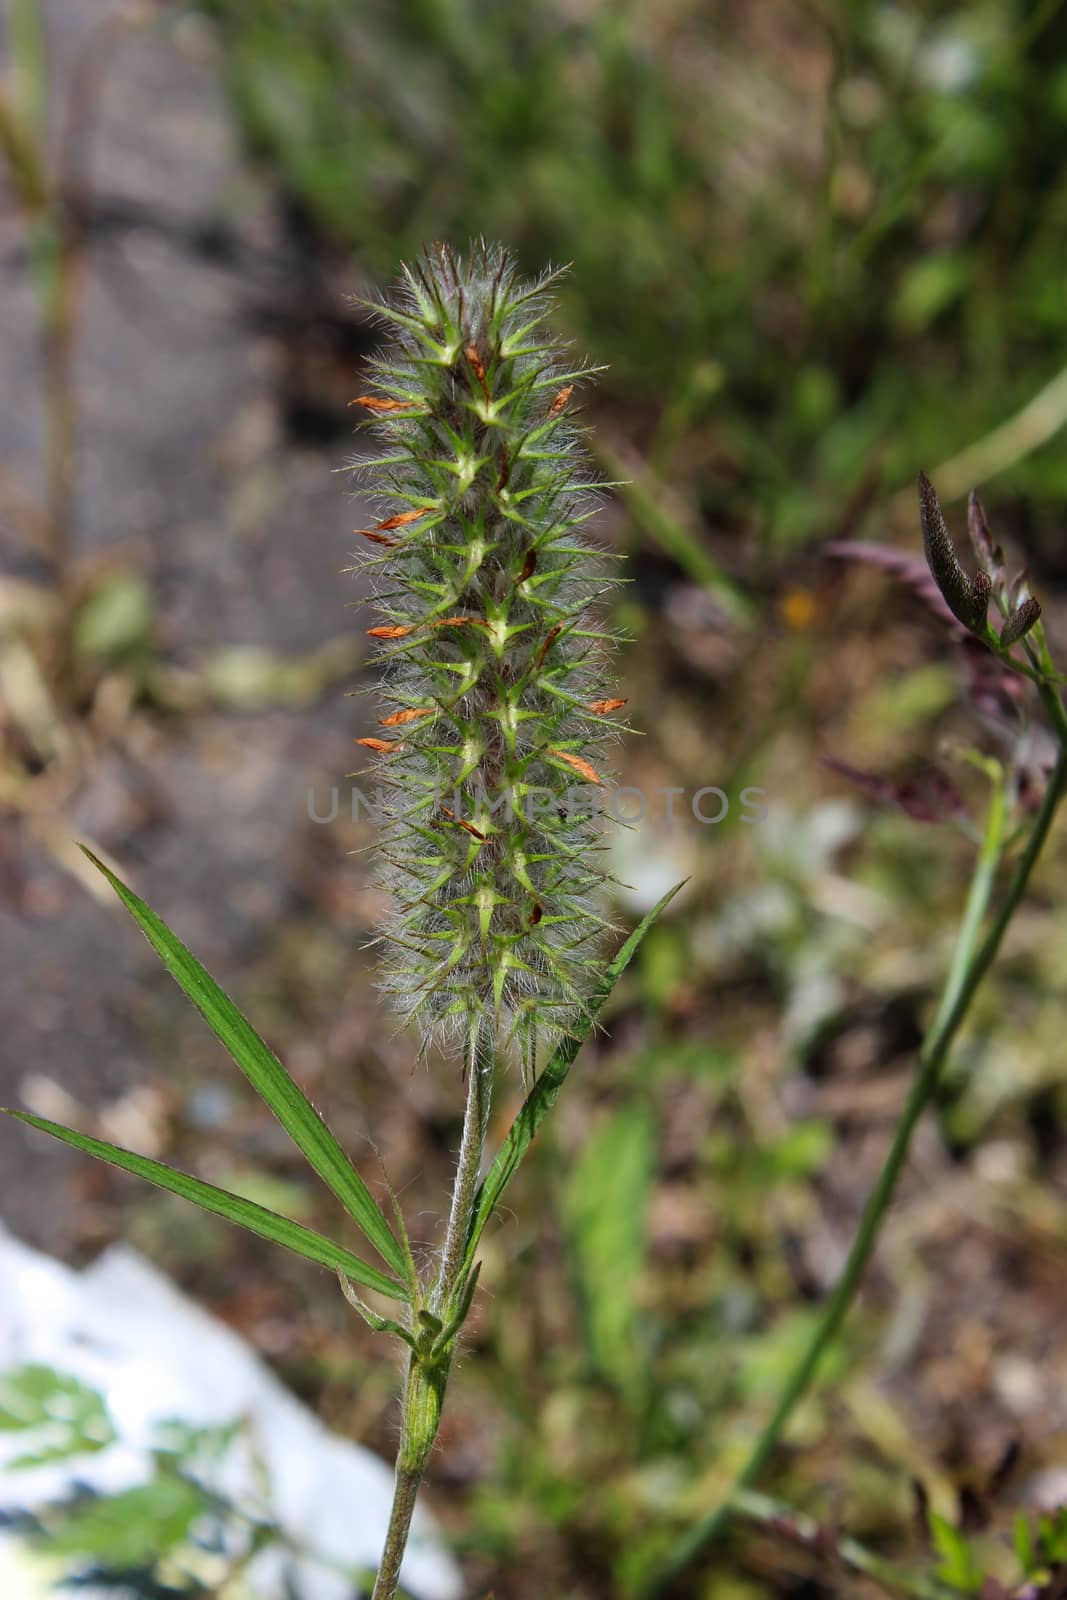 Some kind of grass with thorns on the seed head. by mahirrov